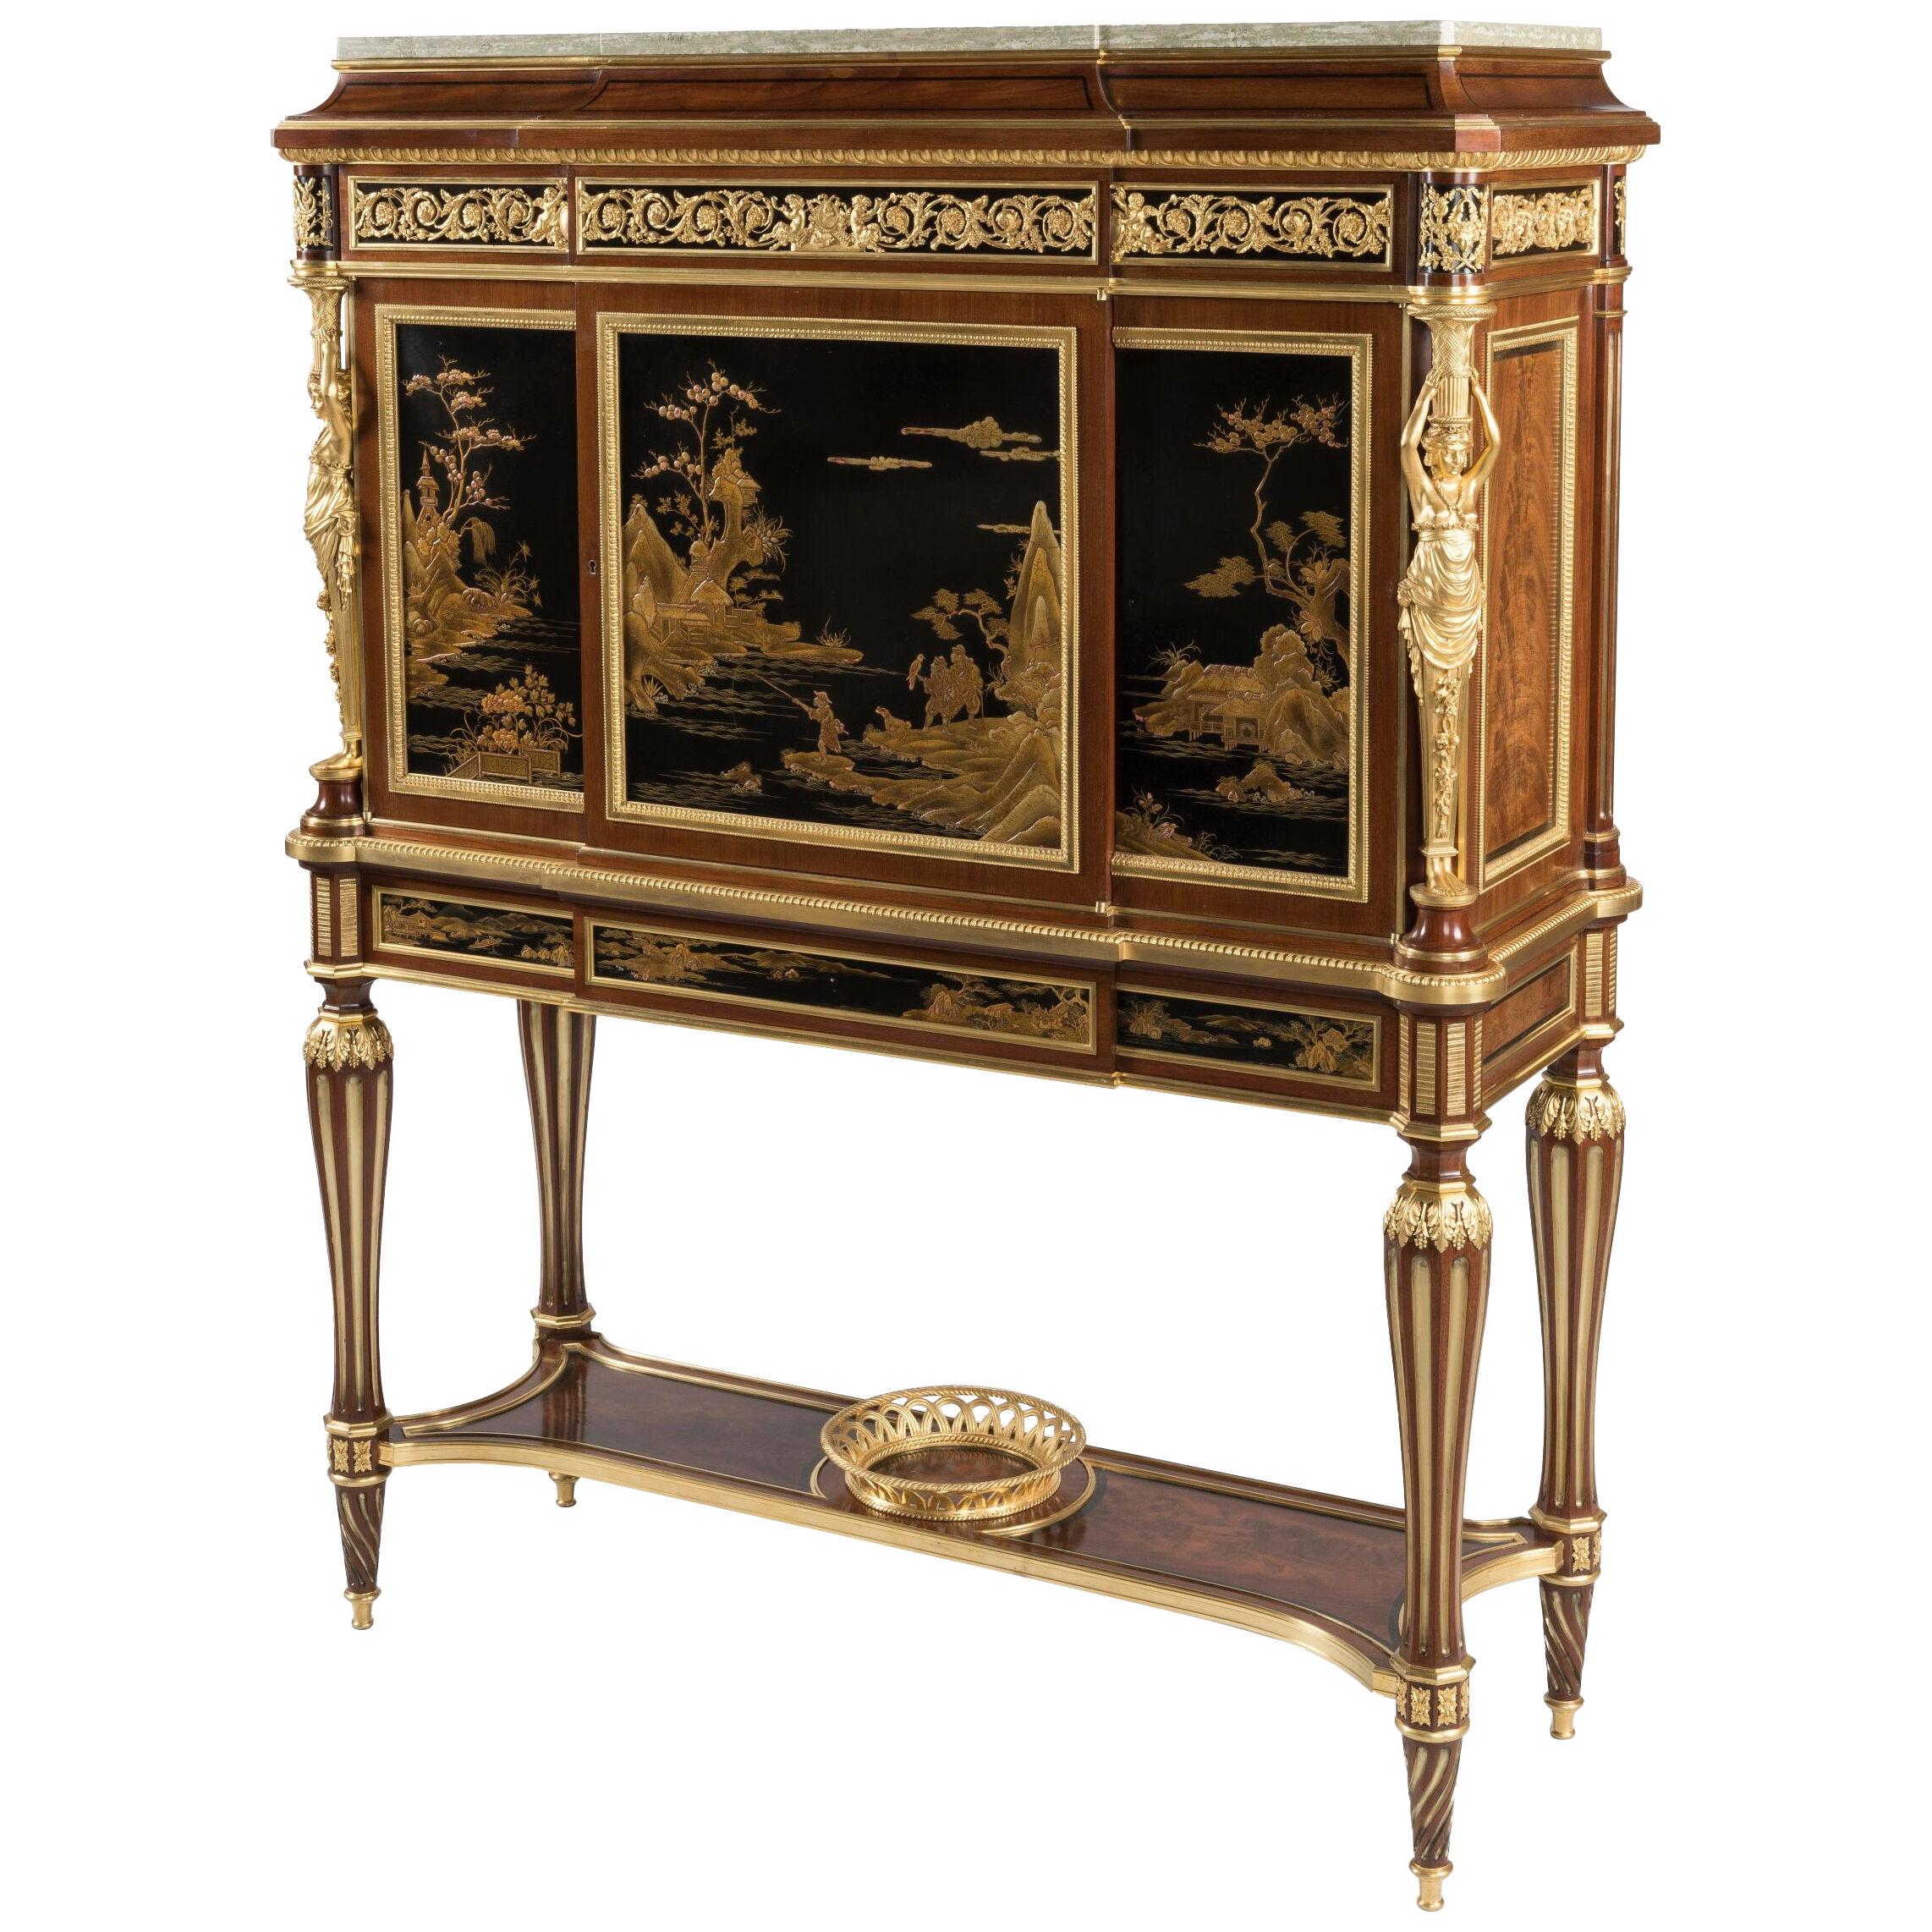 Lacquer-mounted Cabinet on Stand in the Louis XVI Style